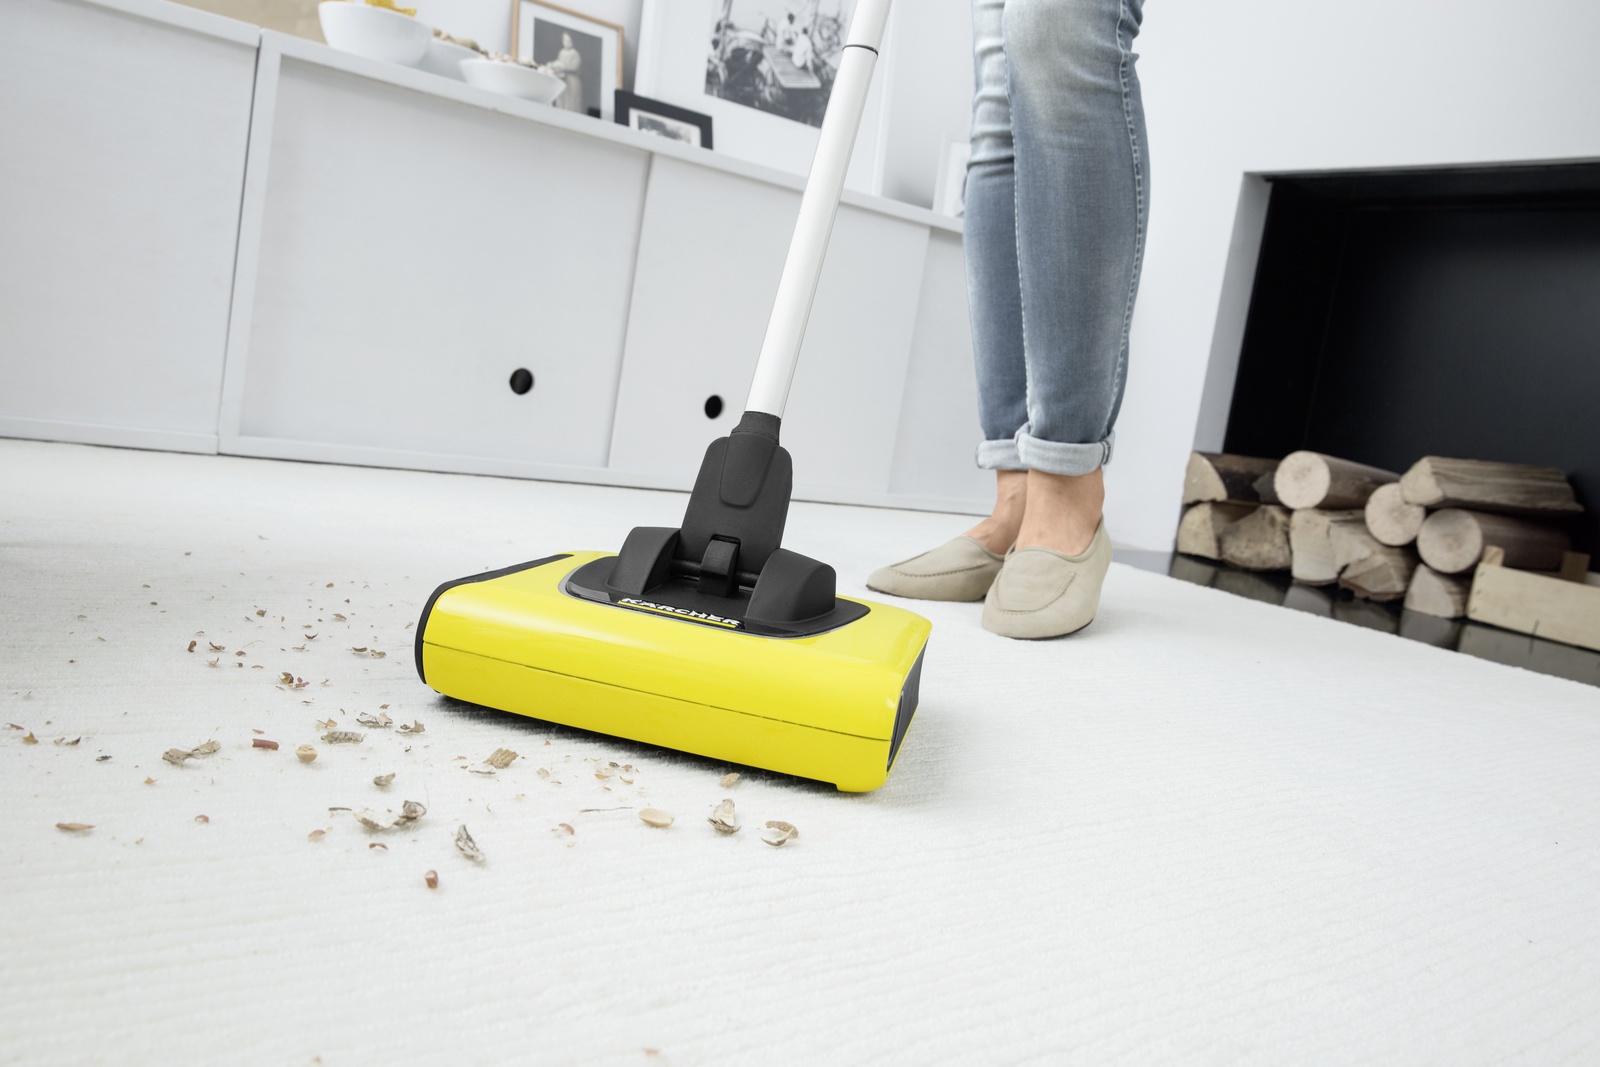 Karcher - KB 5 Electric Floor Sweeper Broom - Multi-Surface - Lightweight  and Cordless - Ideal for Fur, Hair, Dirt, & Debris - 8.25 Cleaning  Width,Yellow